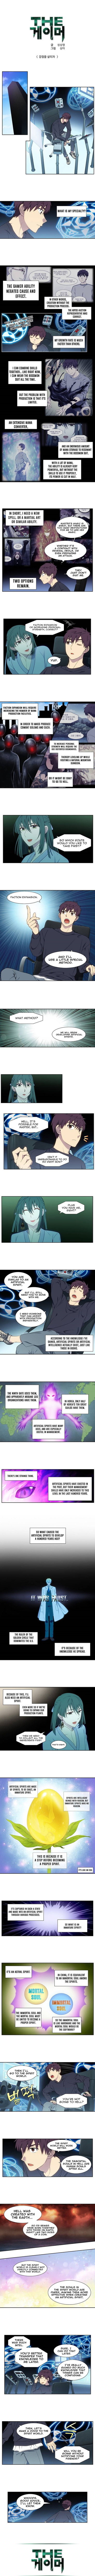 the-gamer-chap-350-1